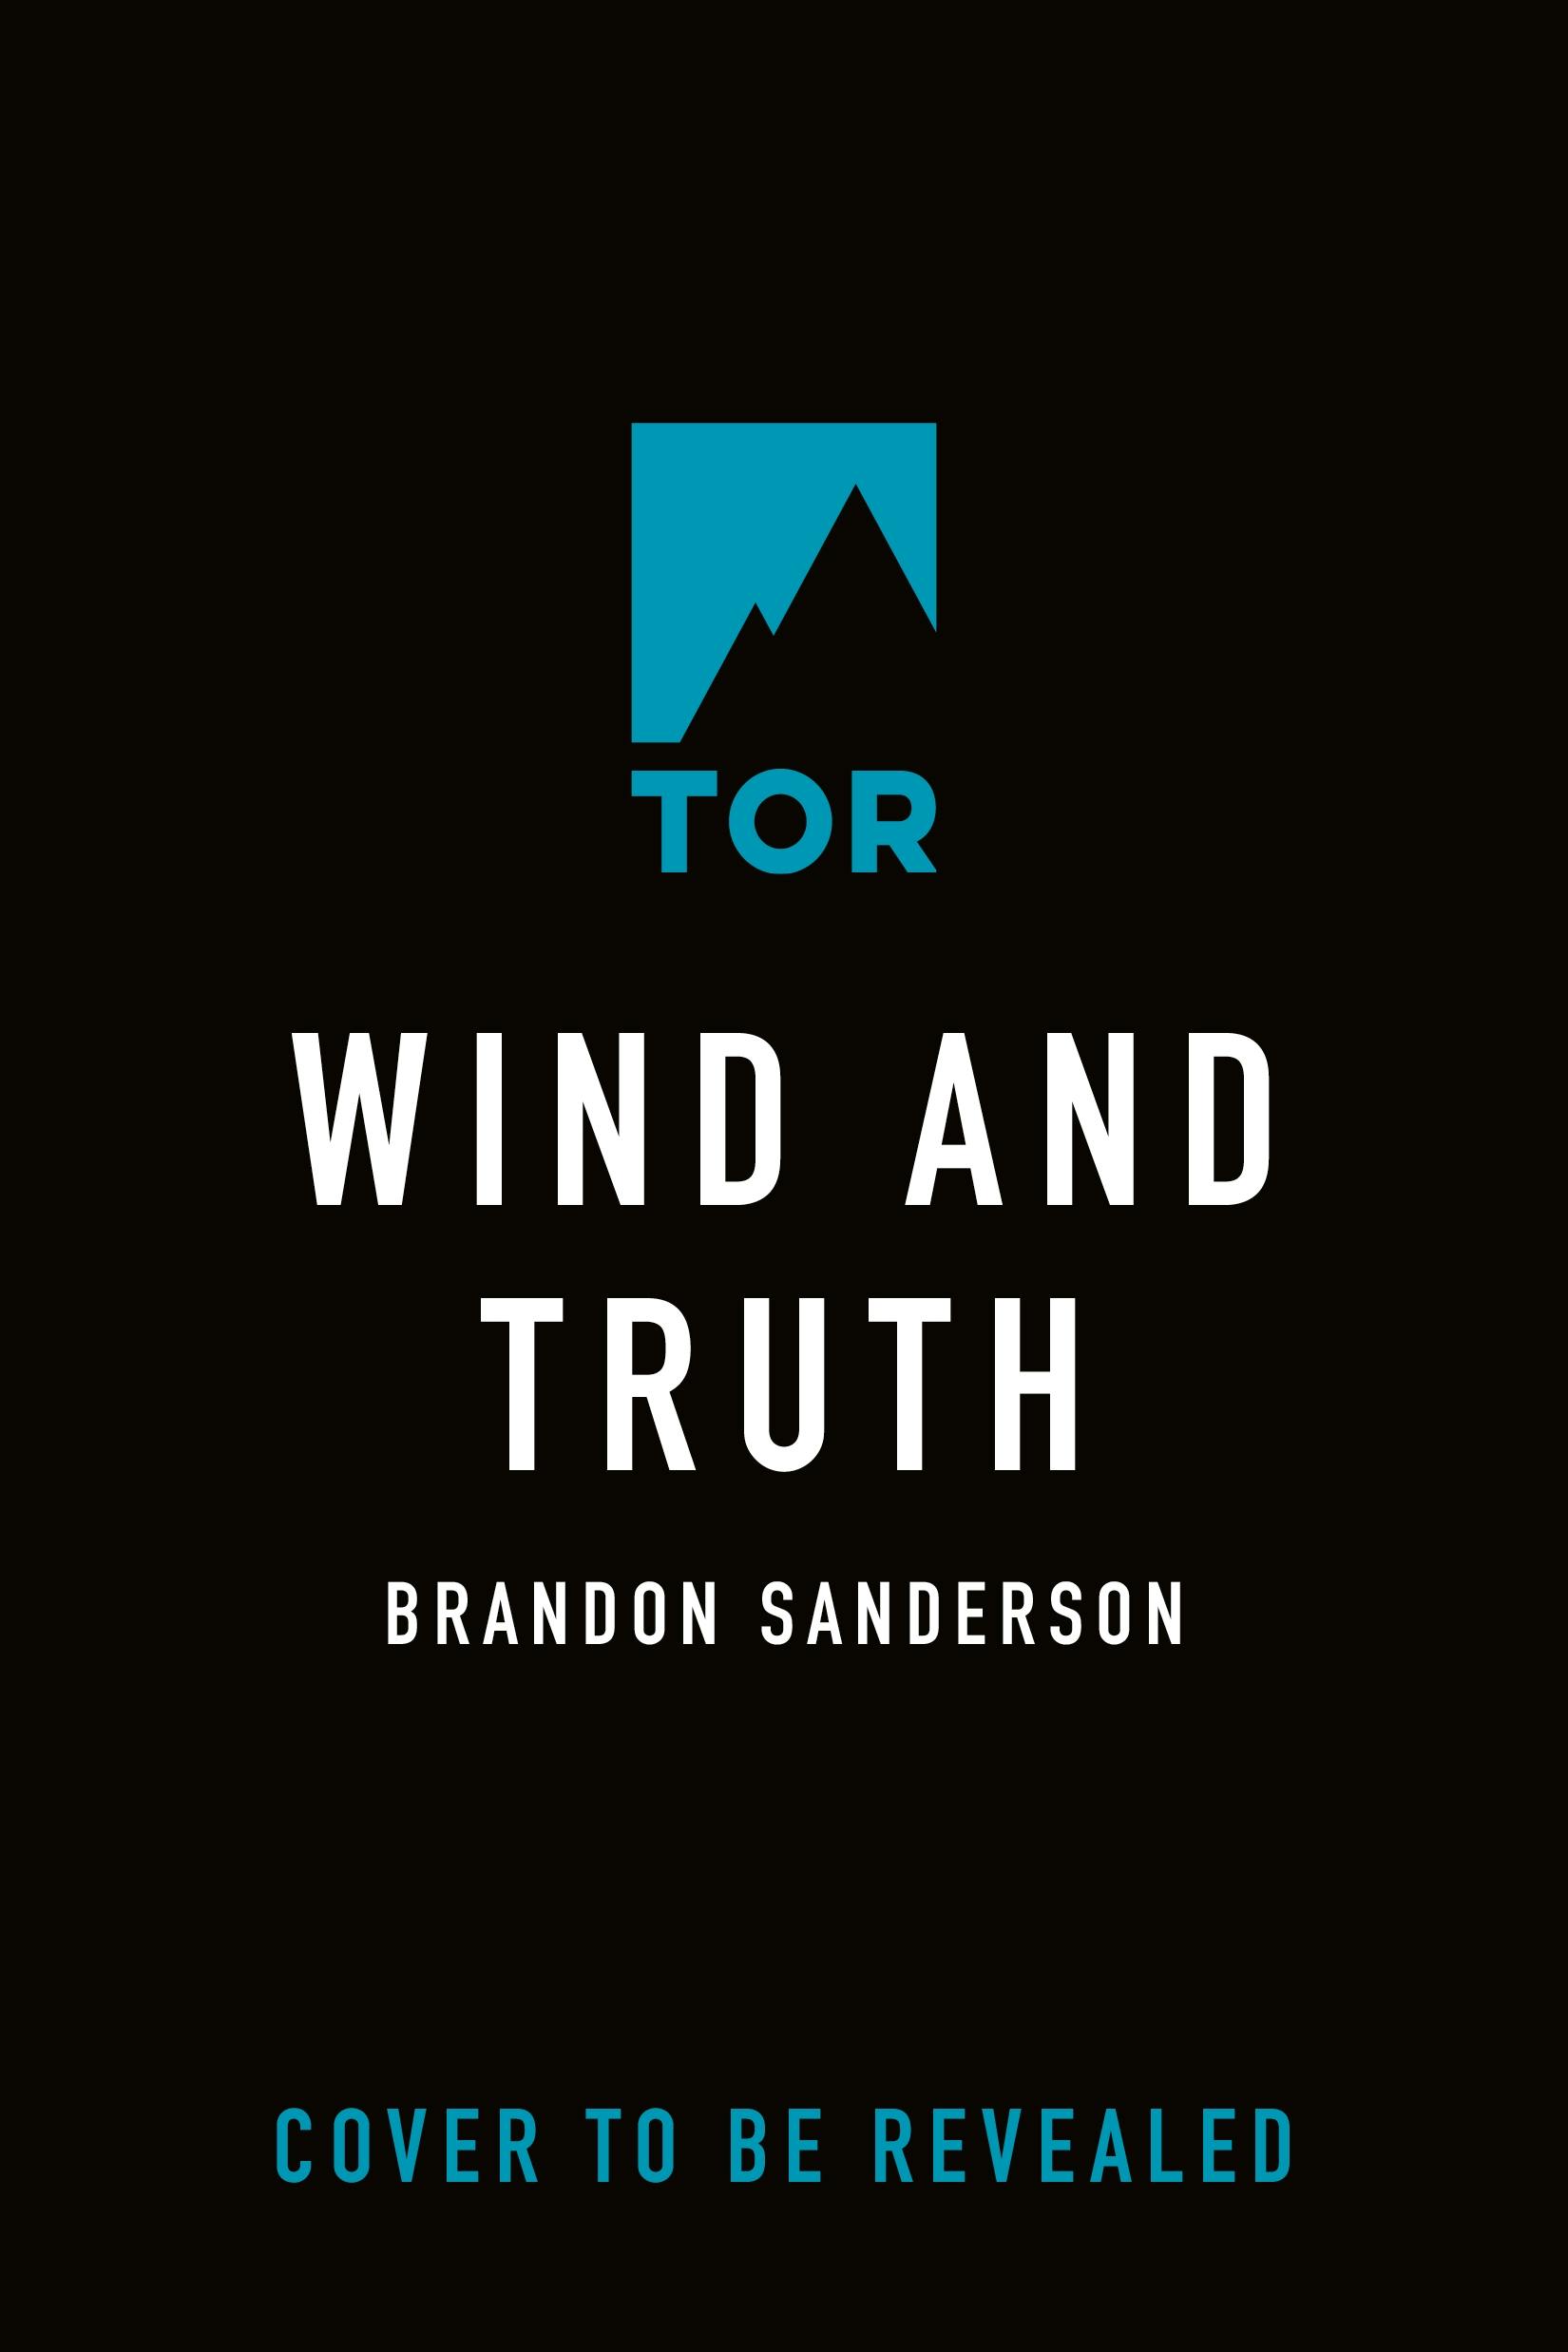 Cover for the book titled as: Wind and Truth